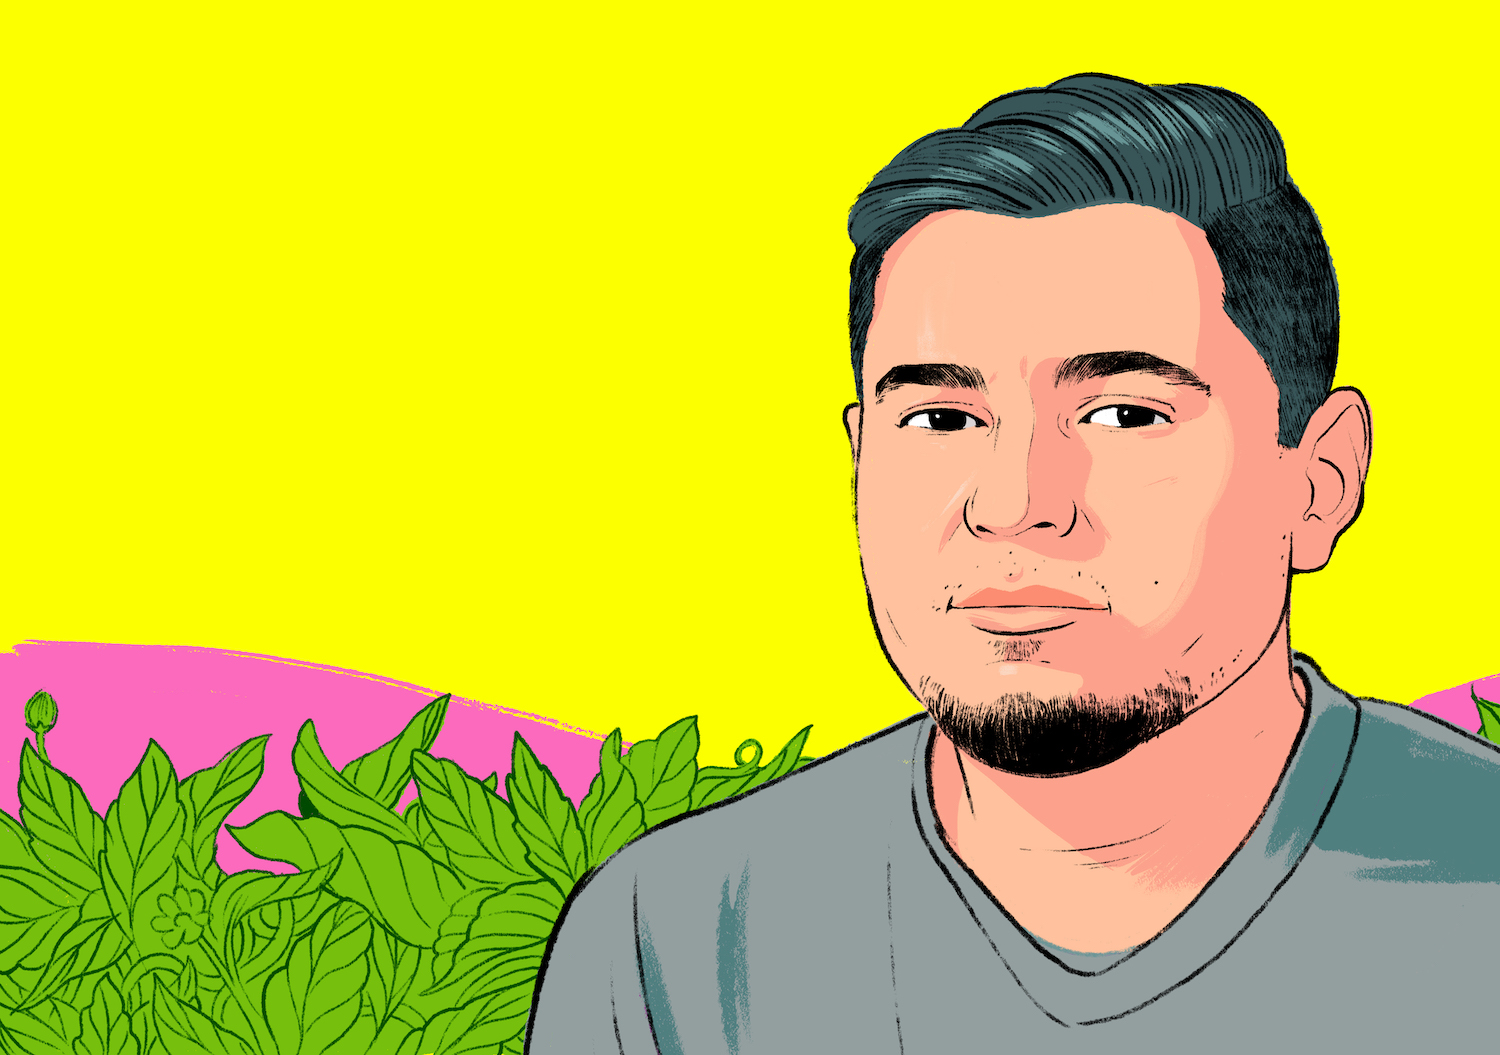 Ivan is a DACA recipient who moved to Florida from Mexico as a child. Credit: Alex Fine, October 2018